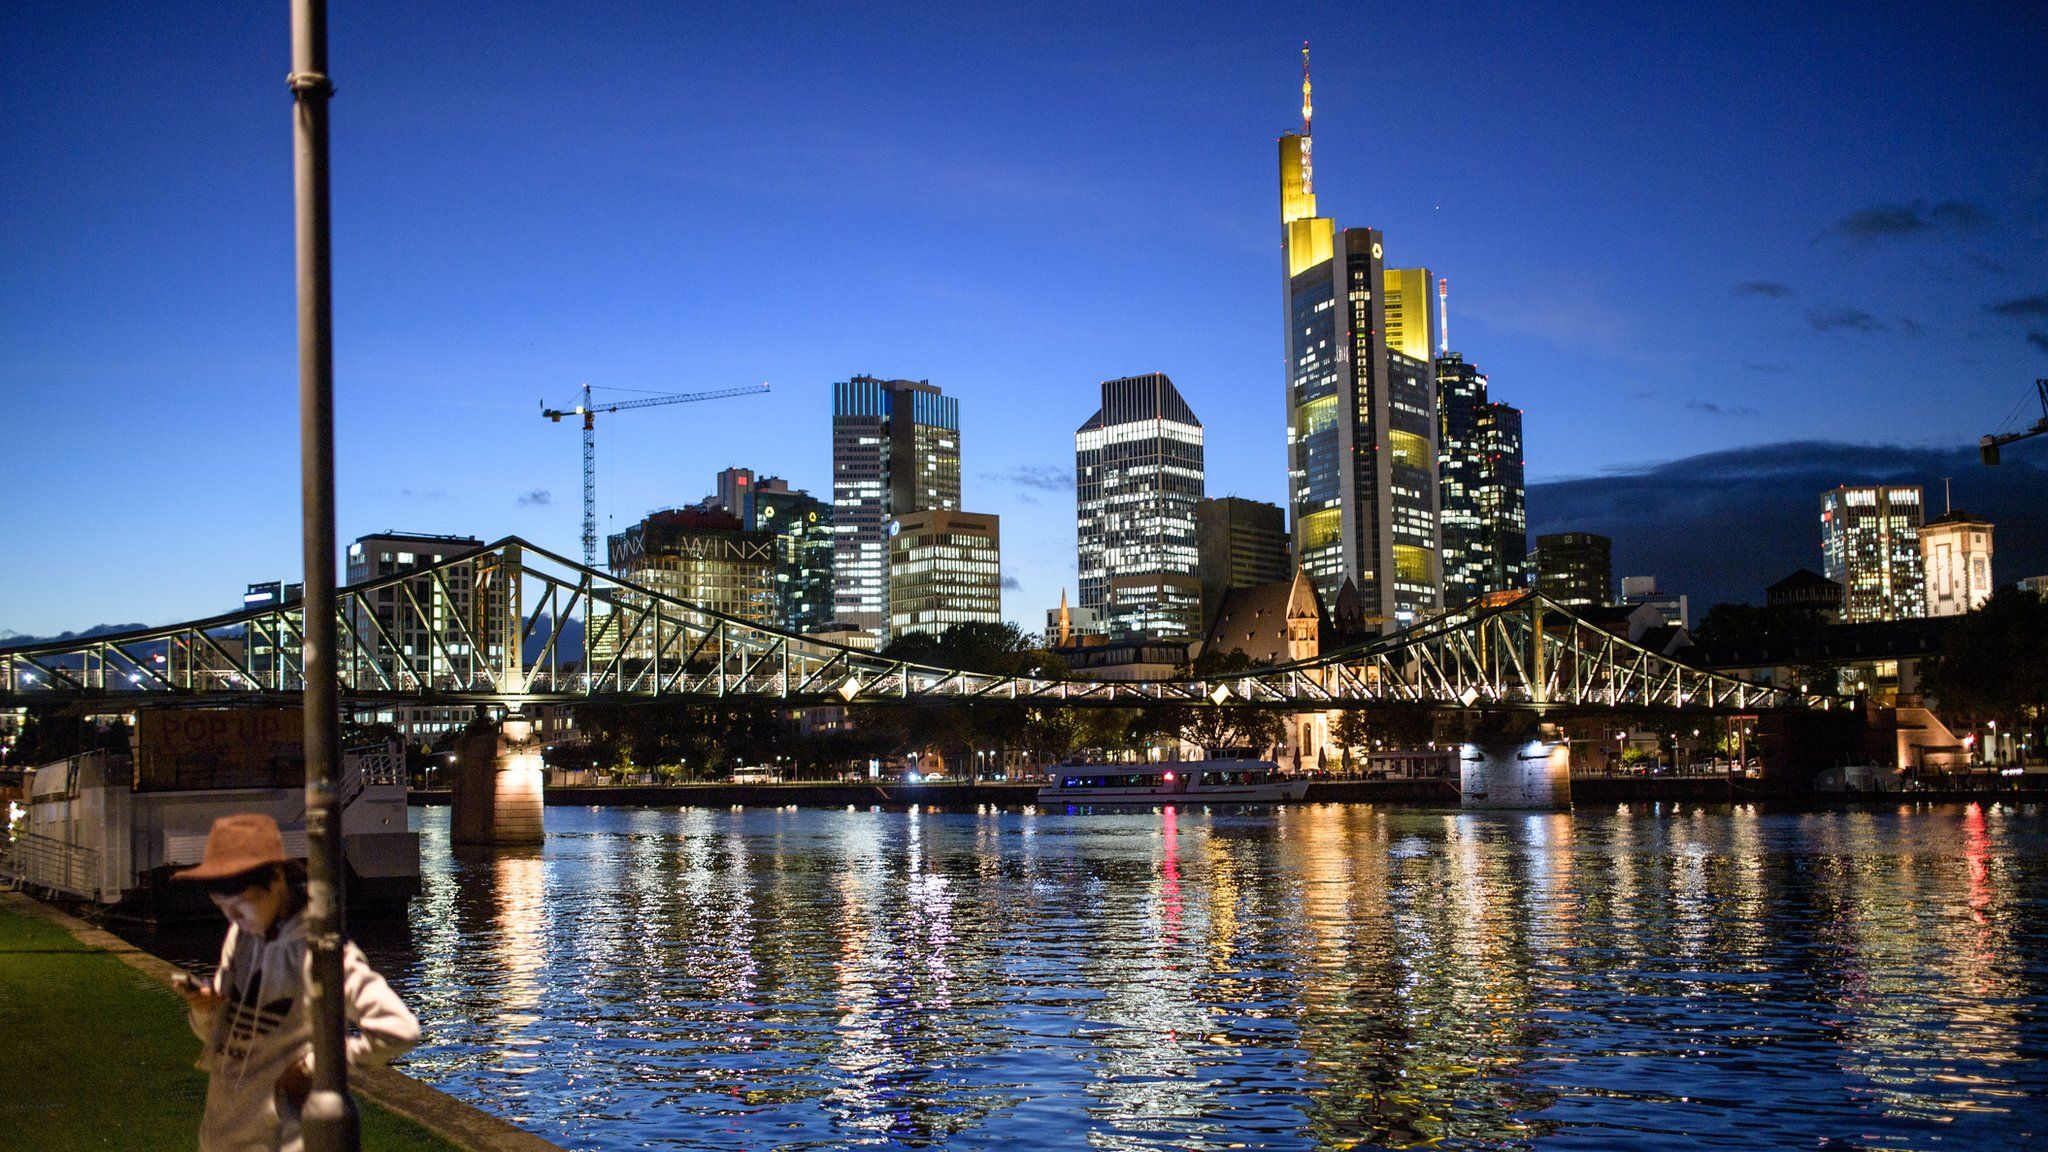 Skyline of Frankfurt and the financial district (October 5, 2016)